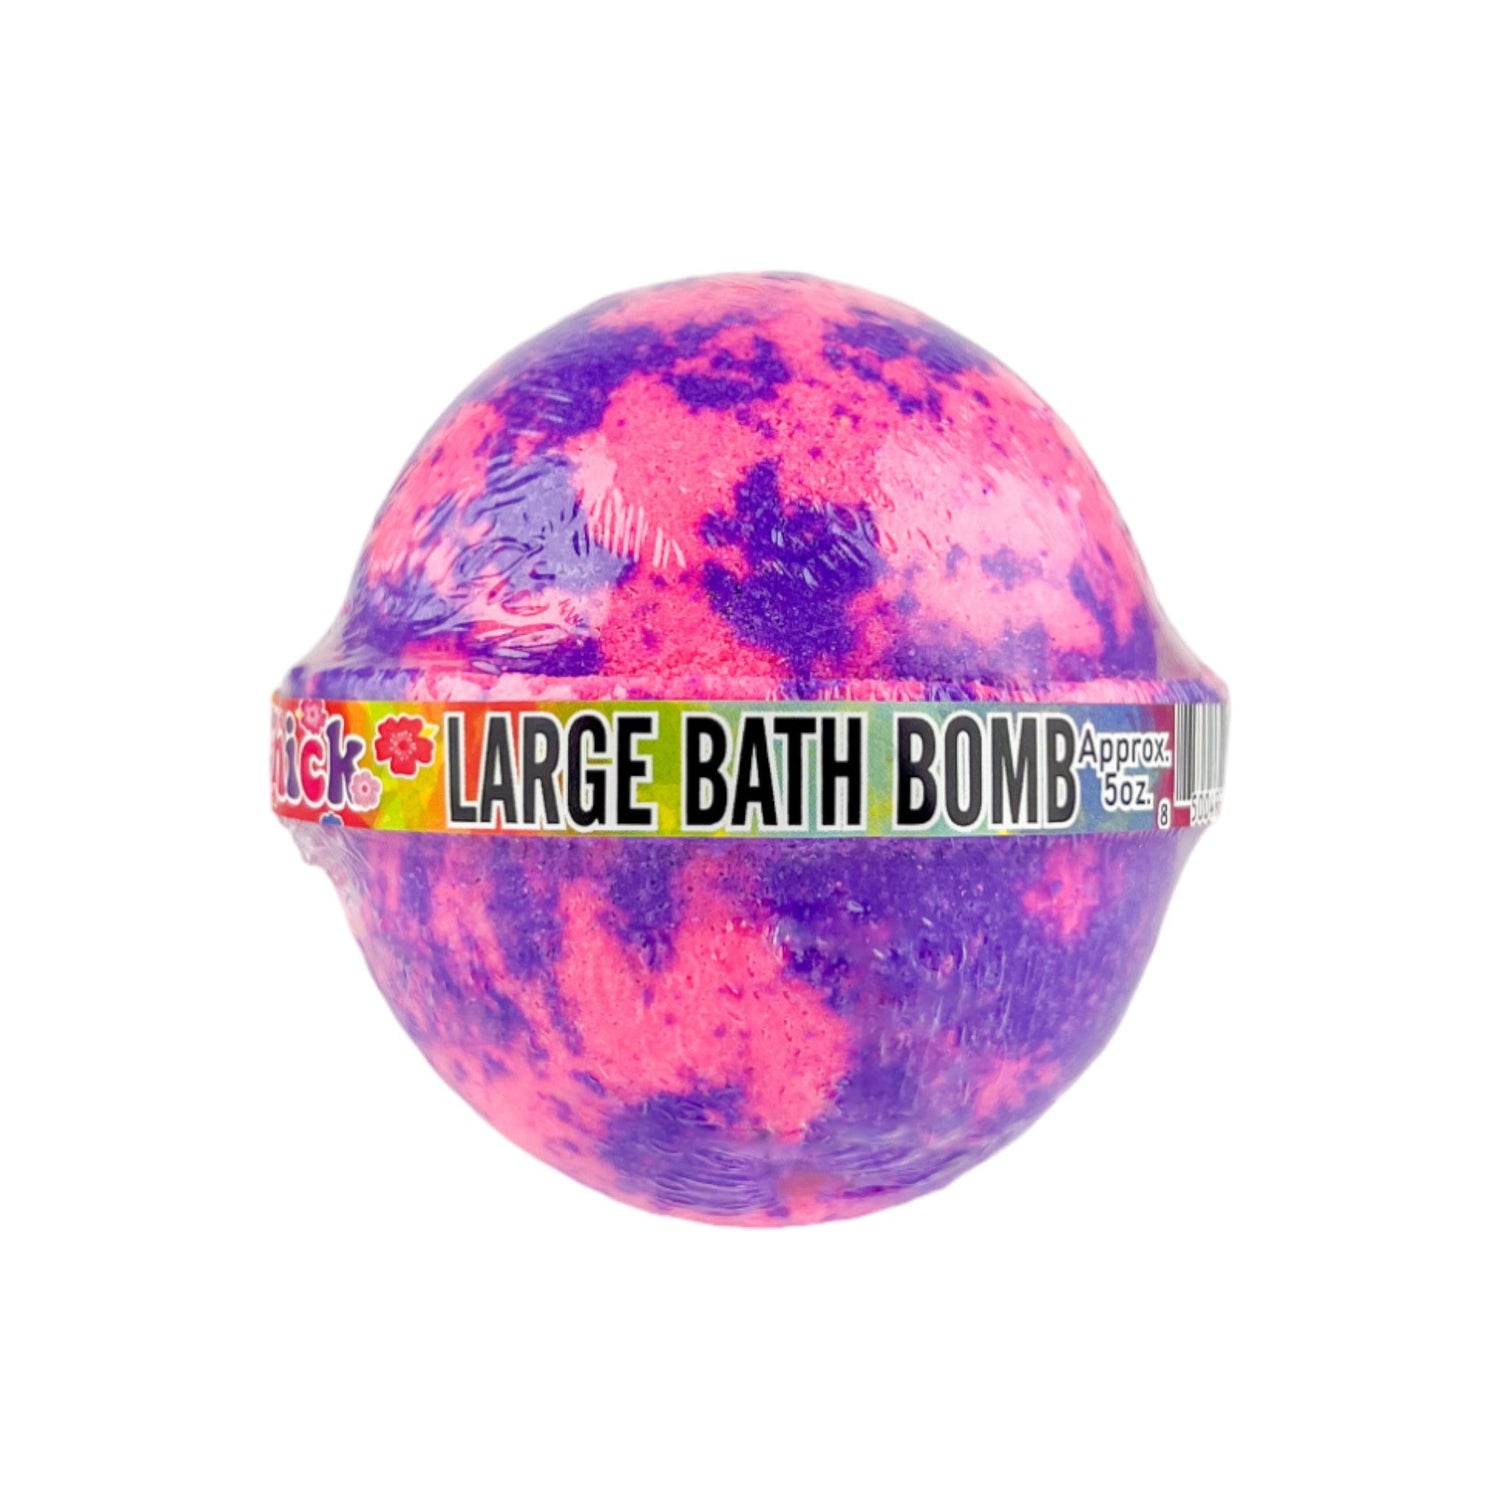 Hippie Chick Bath Bomb -Large - Old Town Soap Co.